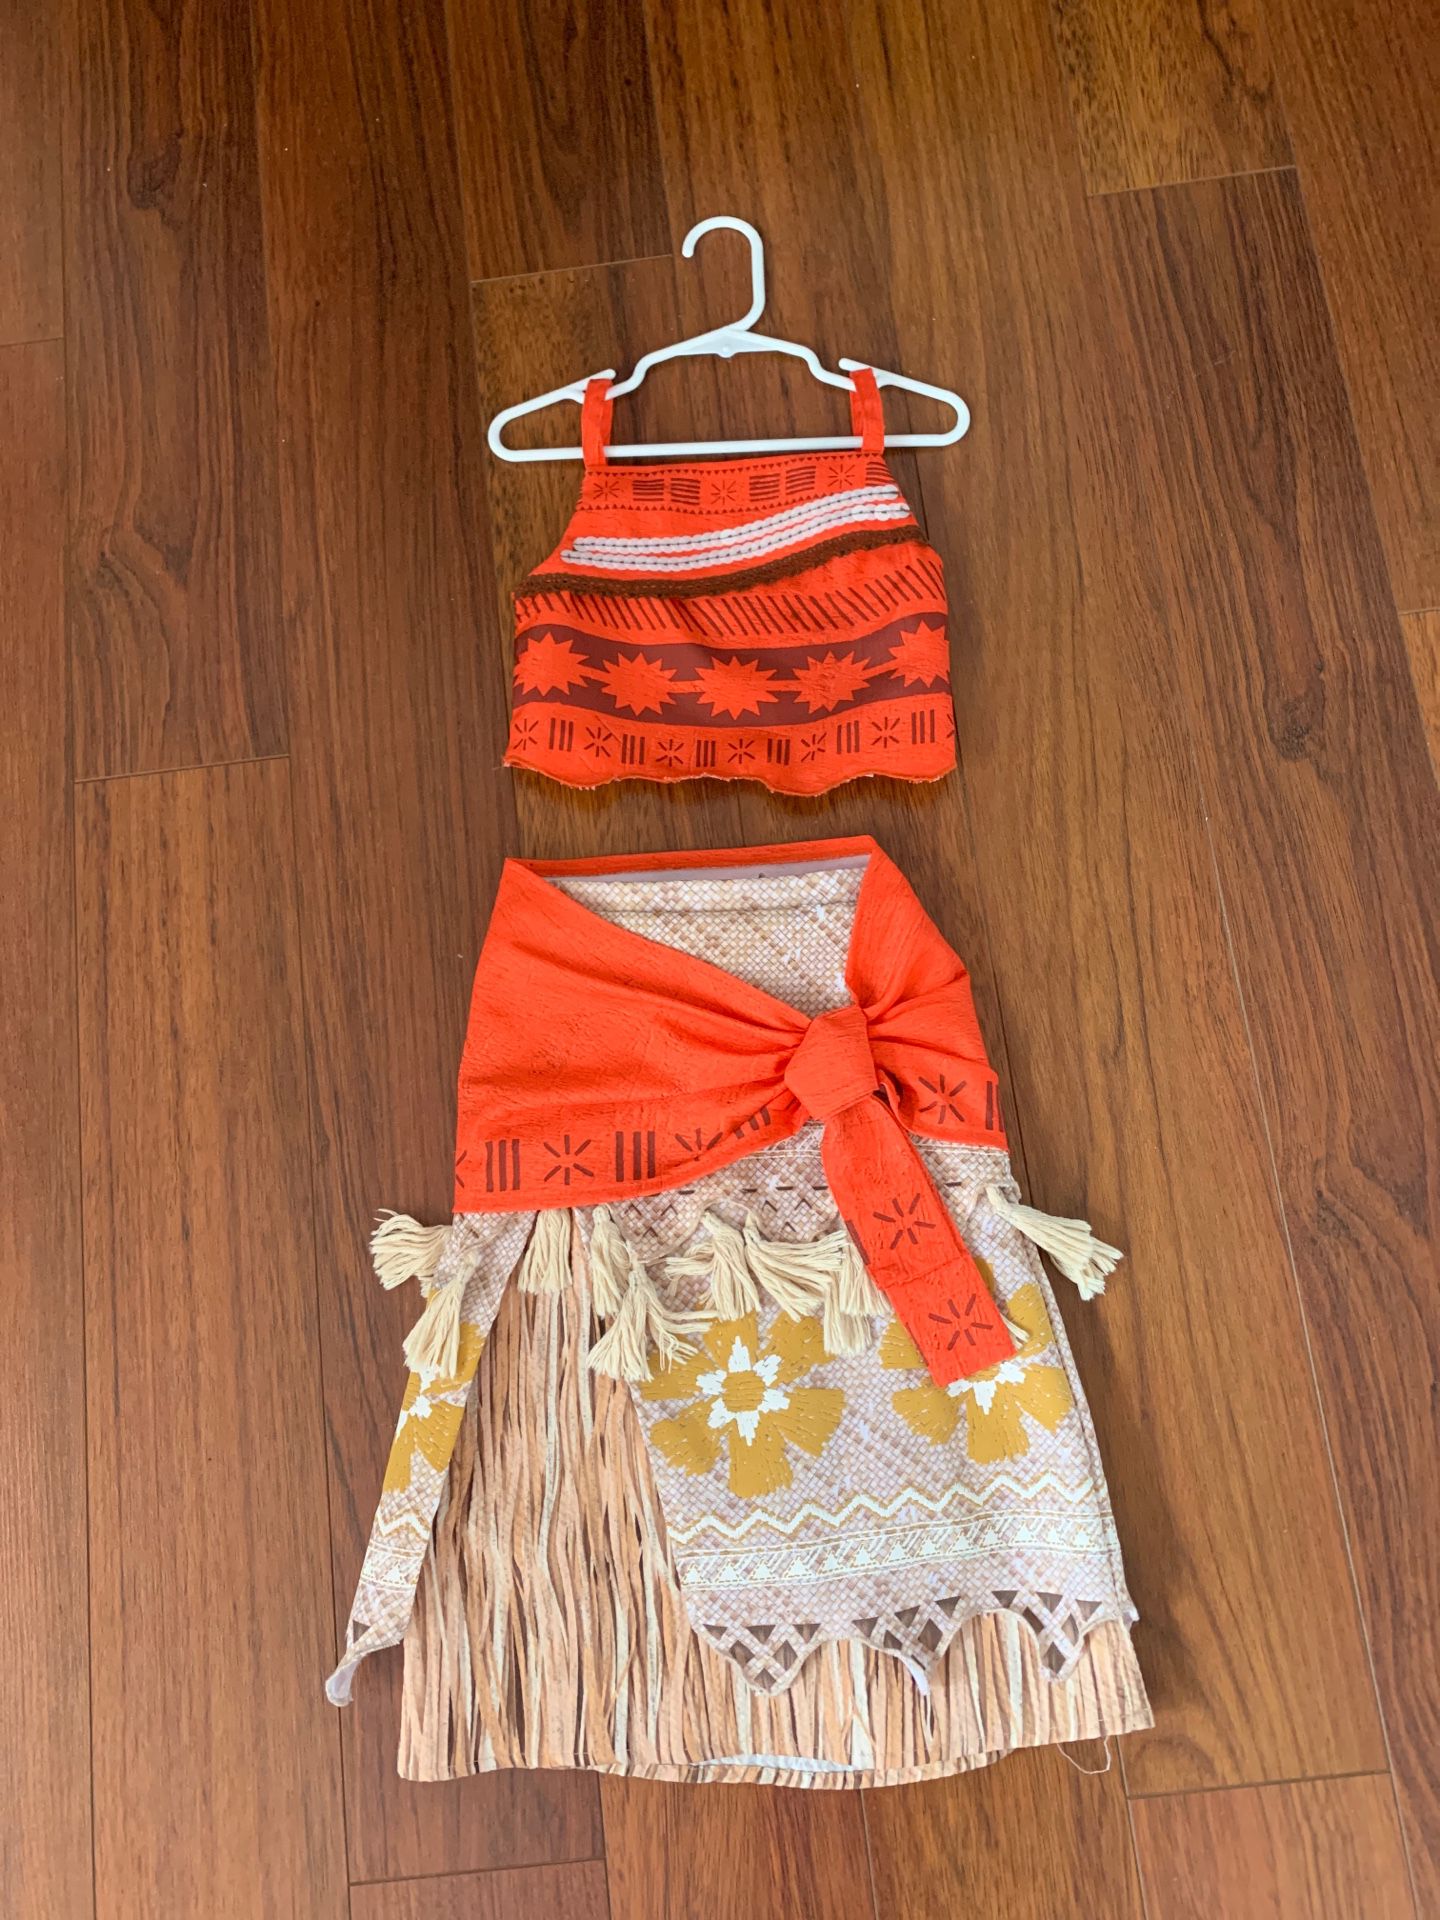 Moana costume from disney store size 4